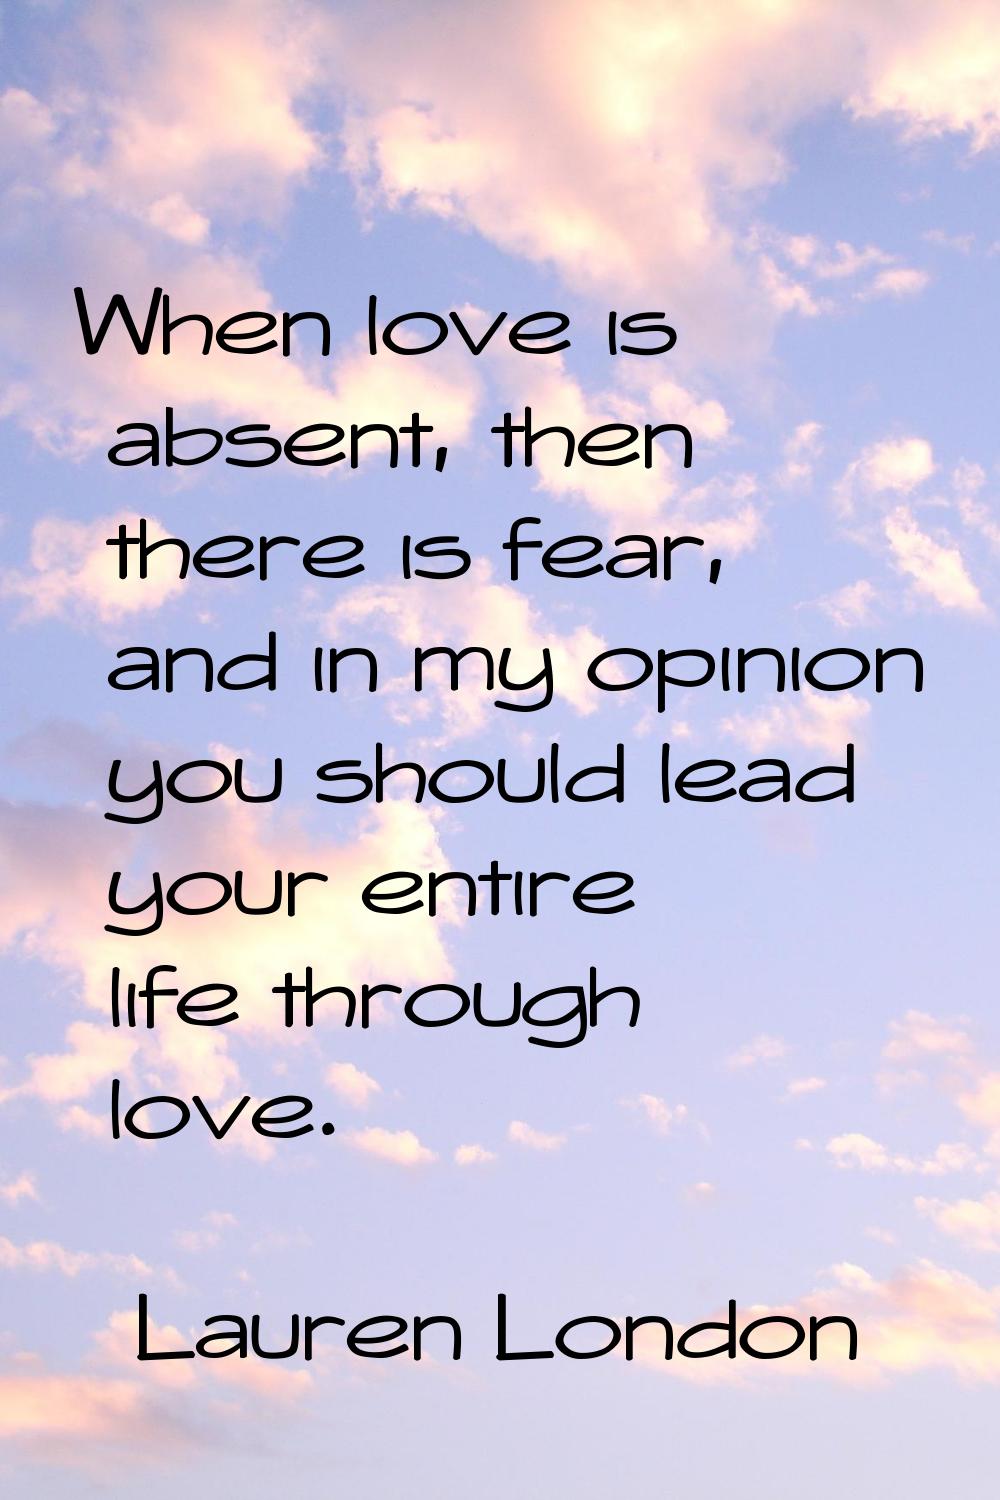 When love is absent, then there is fear, and in my opinion you should lead your entire life through